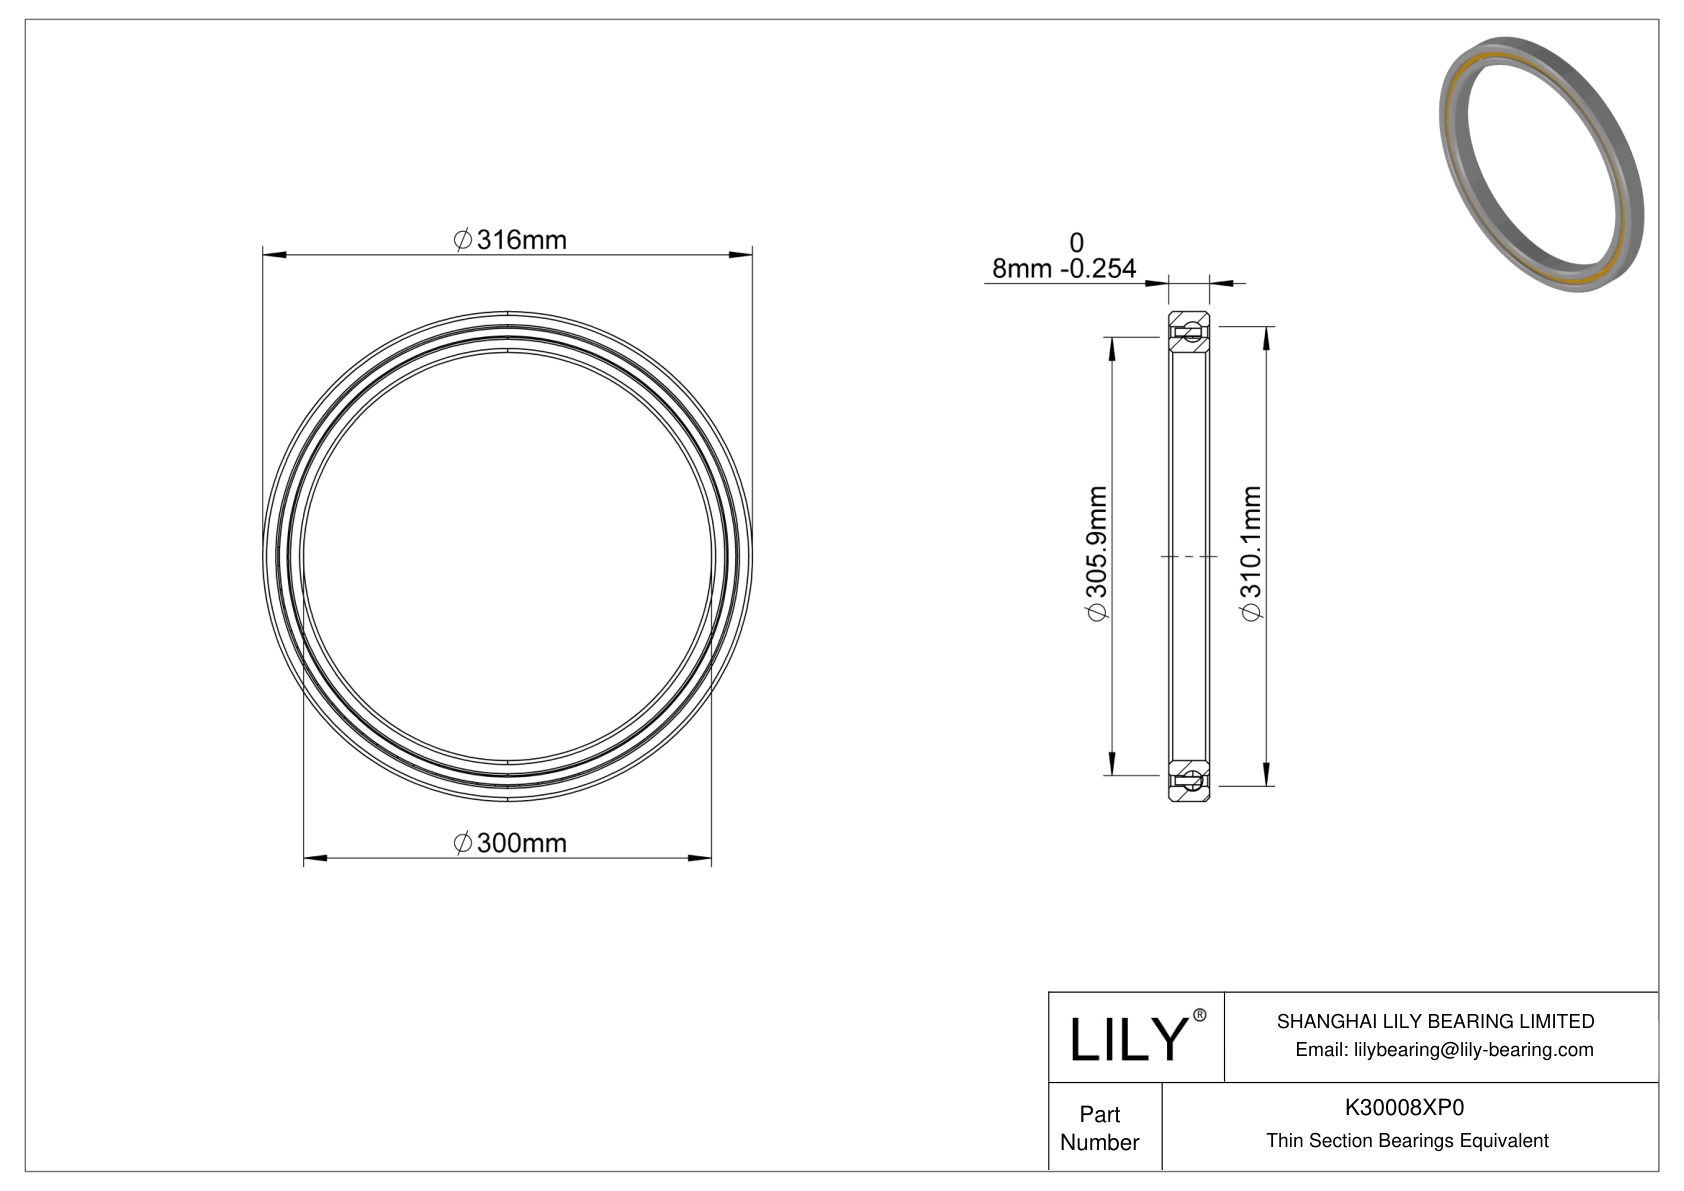 K30008XP0 Constant Section (CS) Bearings cad drawing